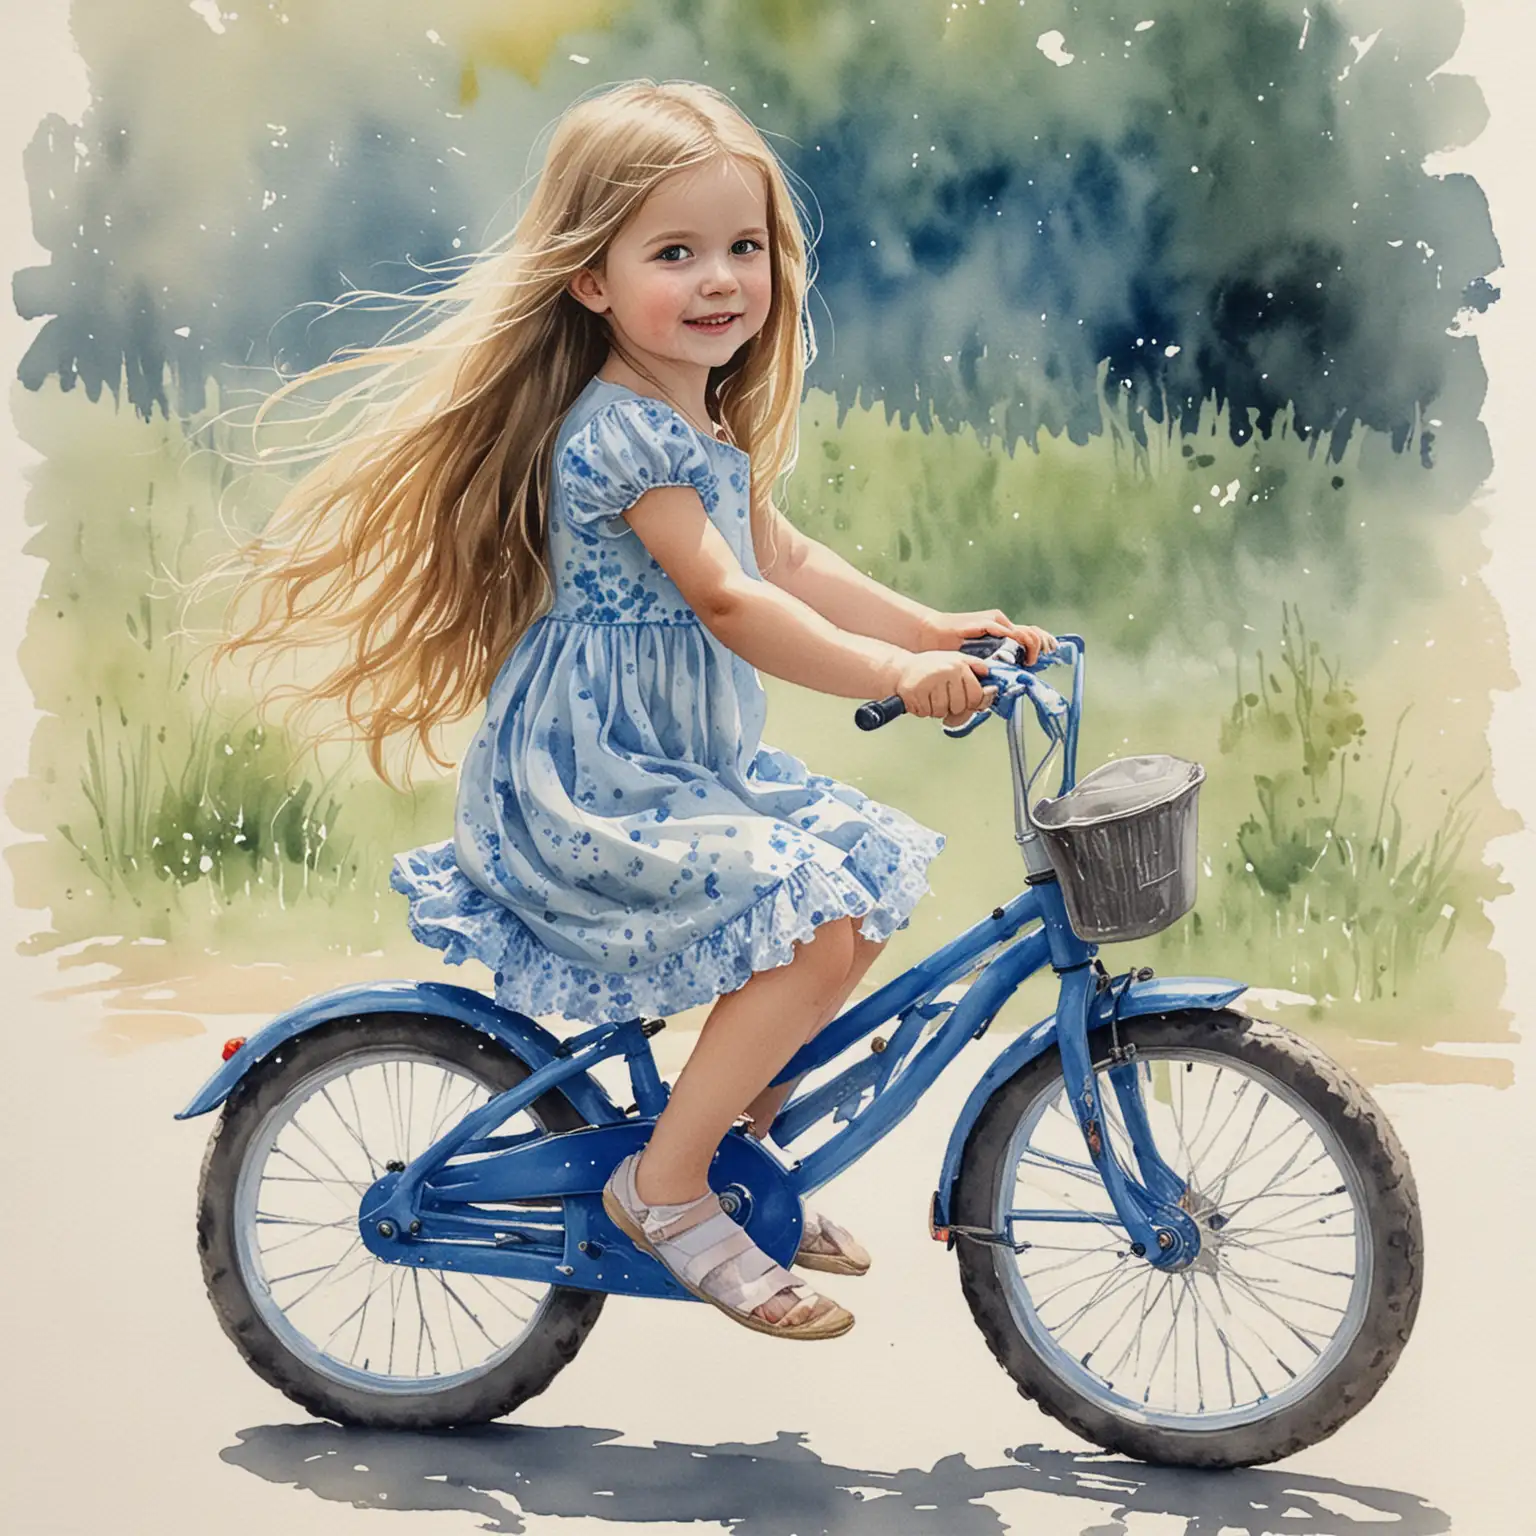 Watercolor Painting of a Girl Riding a Blue Bike in Flowing Dress